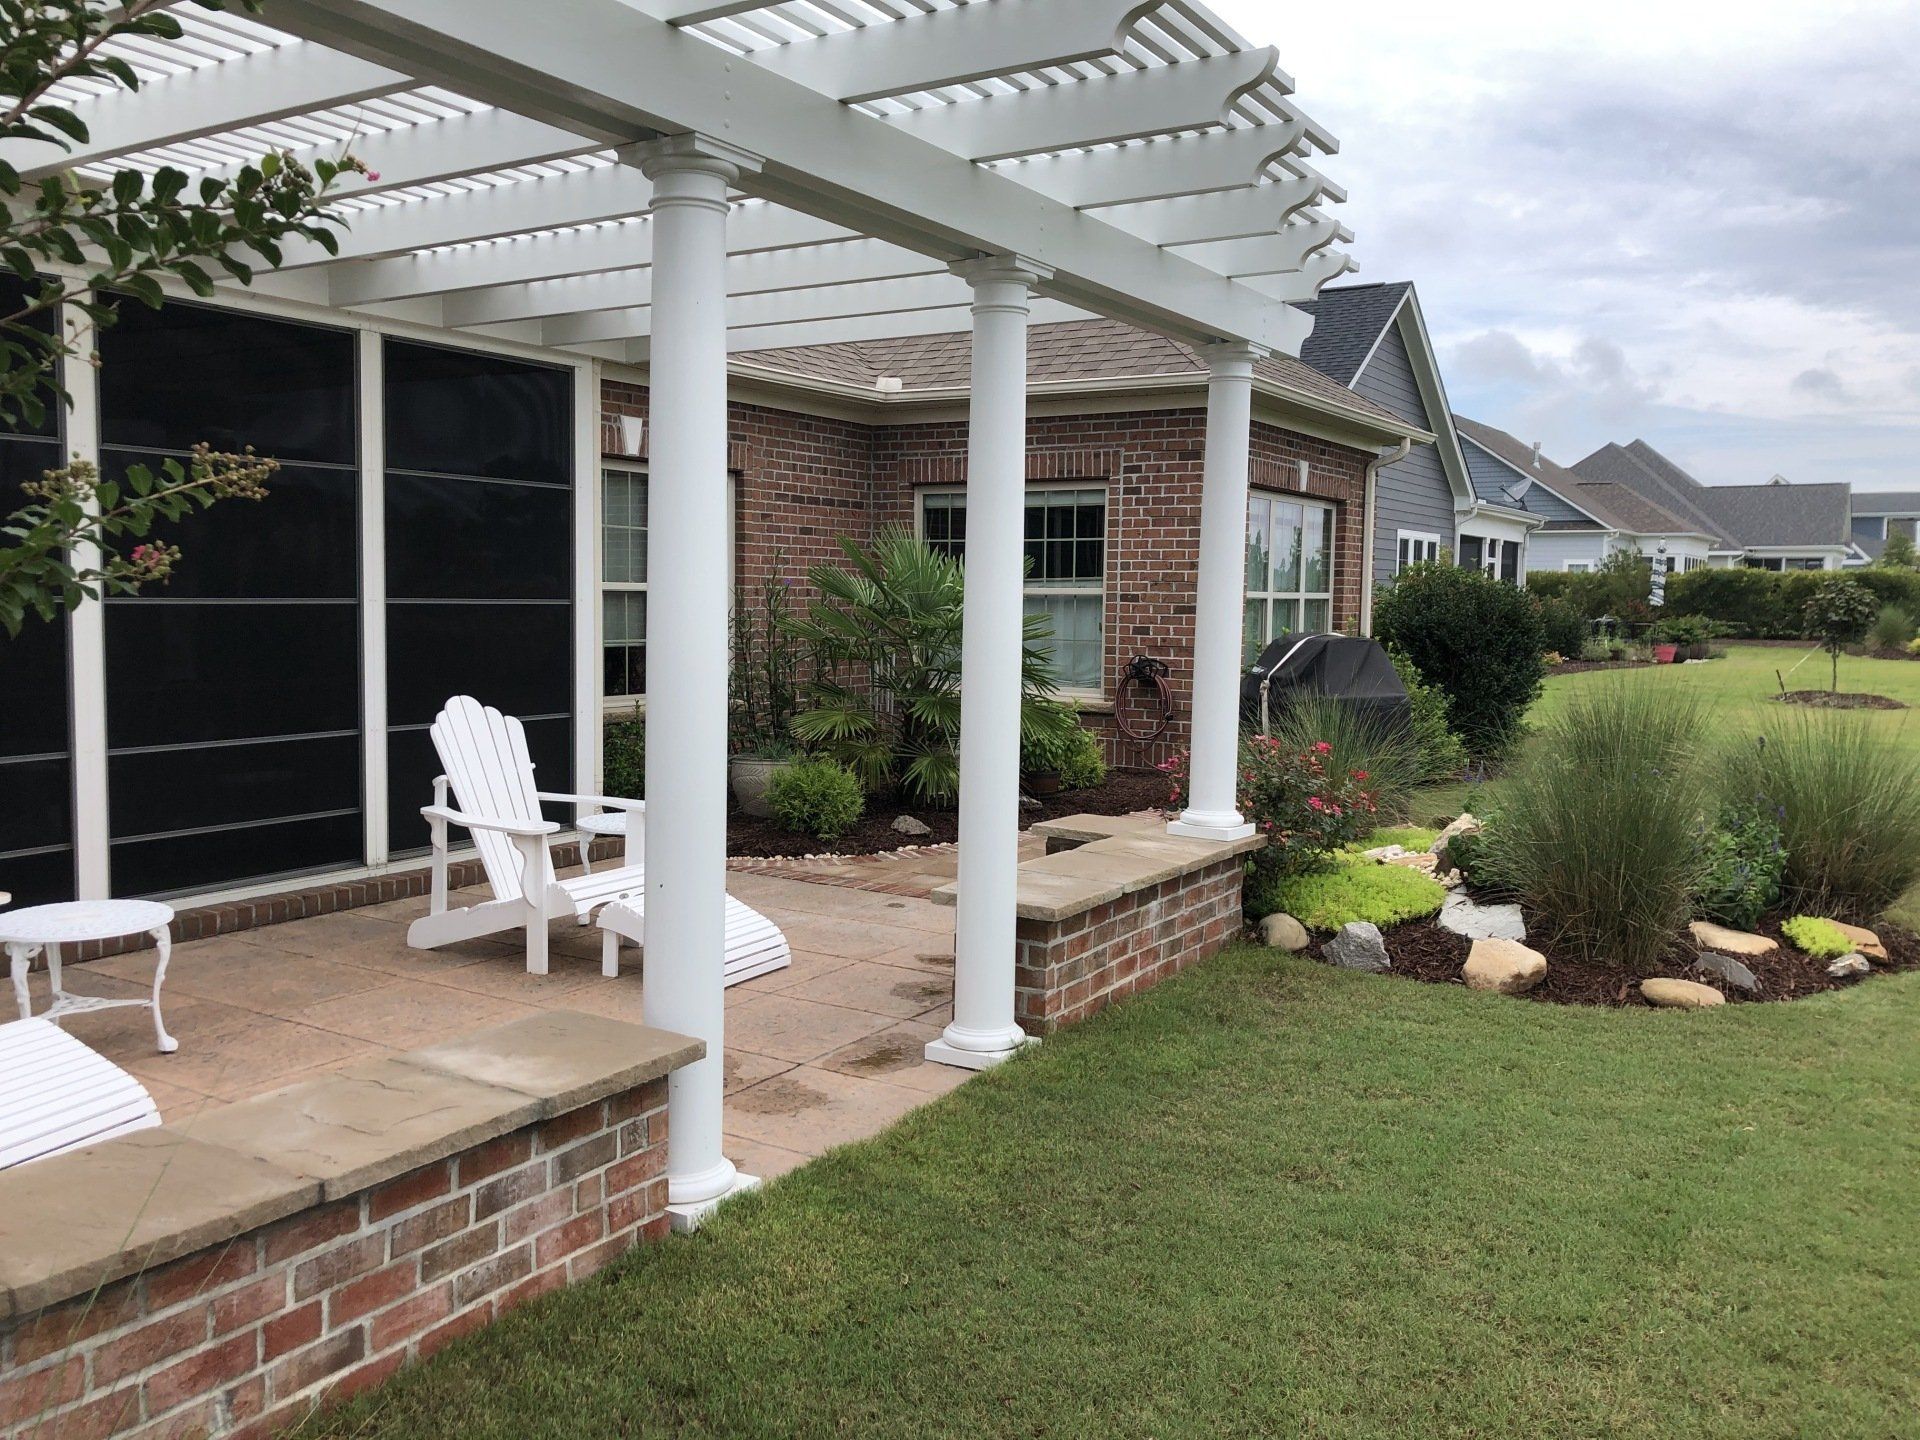 Pergola installation with white pillars and a patio